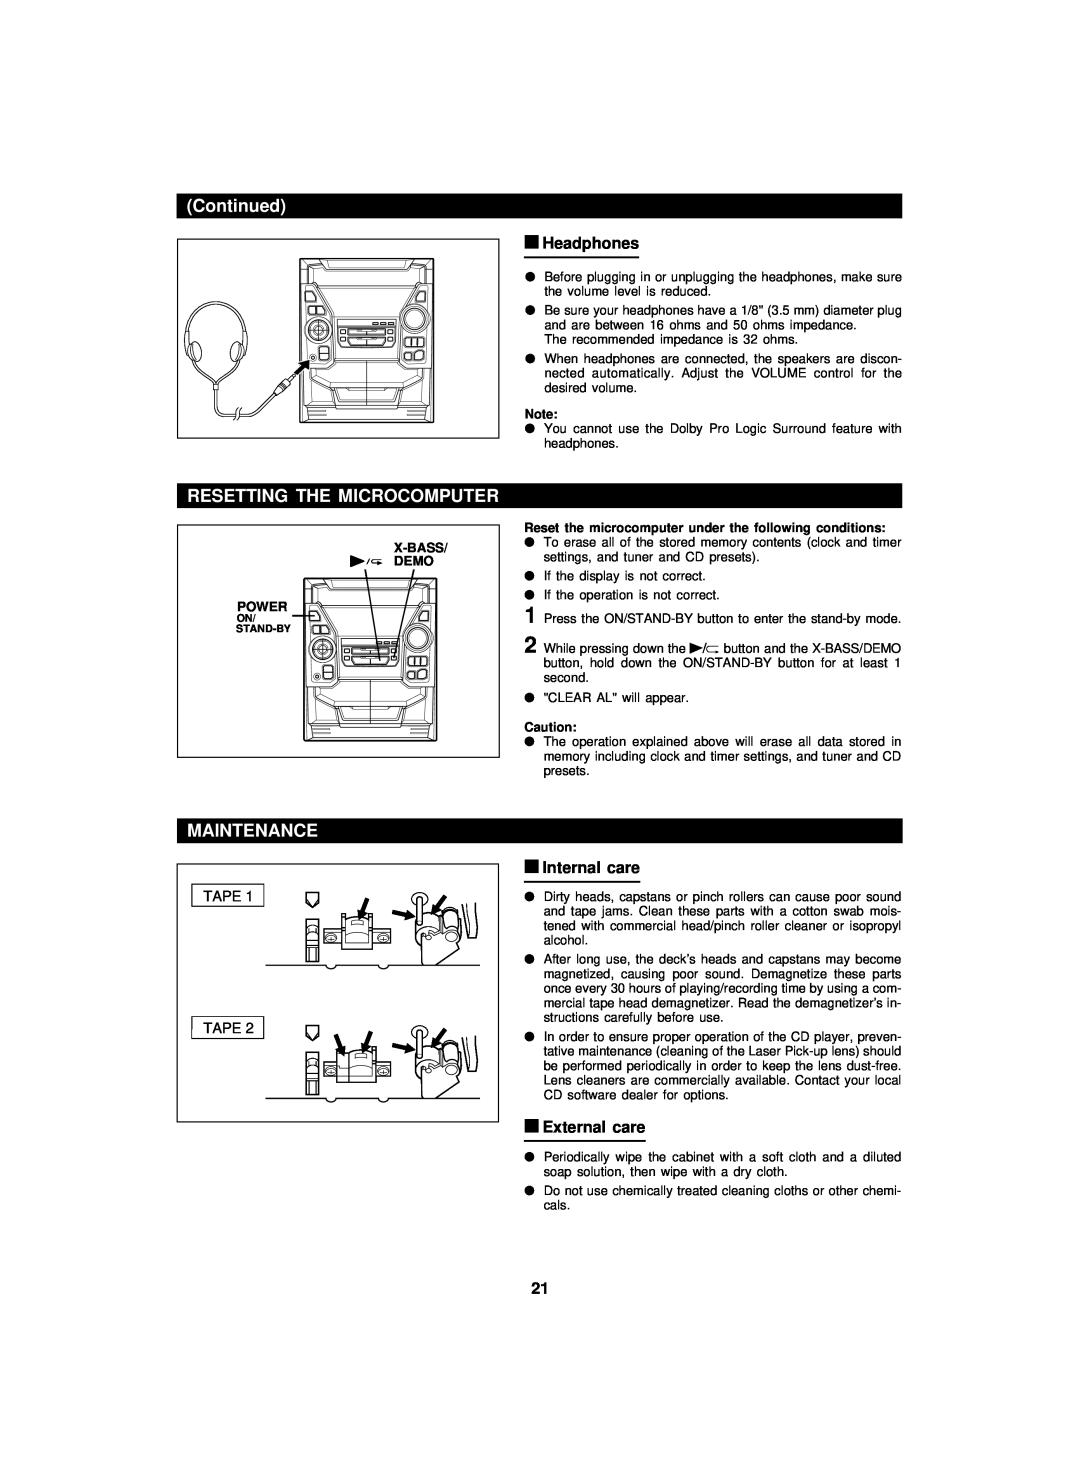 Sharp CD-PC3500 operation manual Resetting The Microcomputer, Continued, Maintenance, Tape 